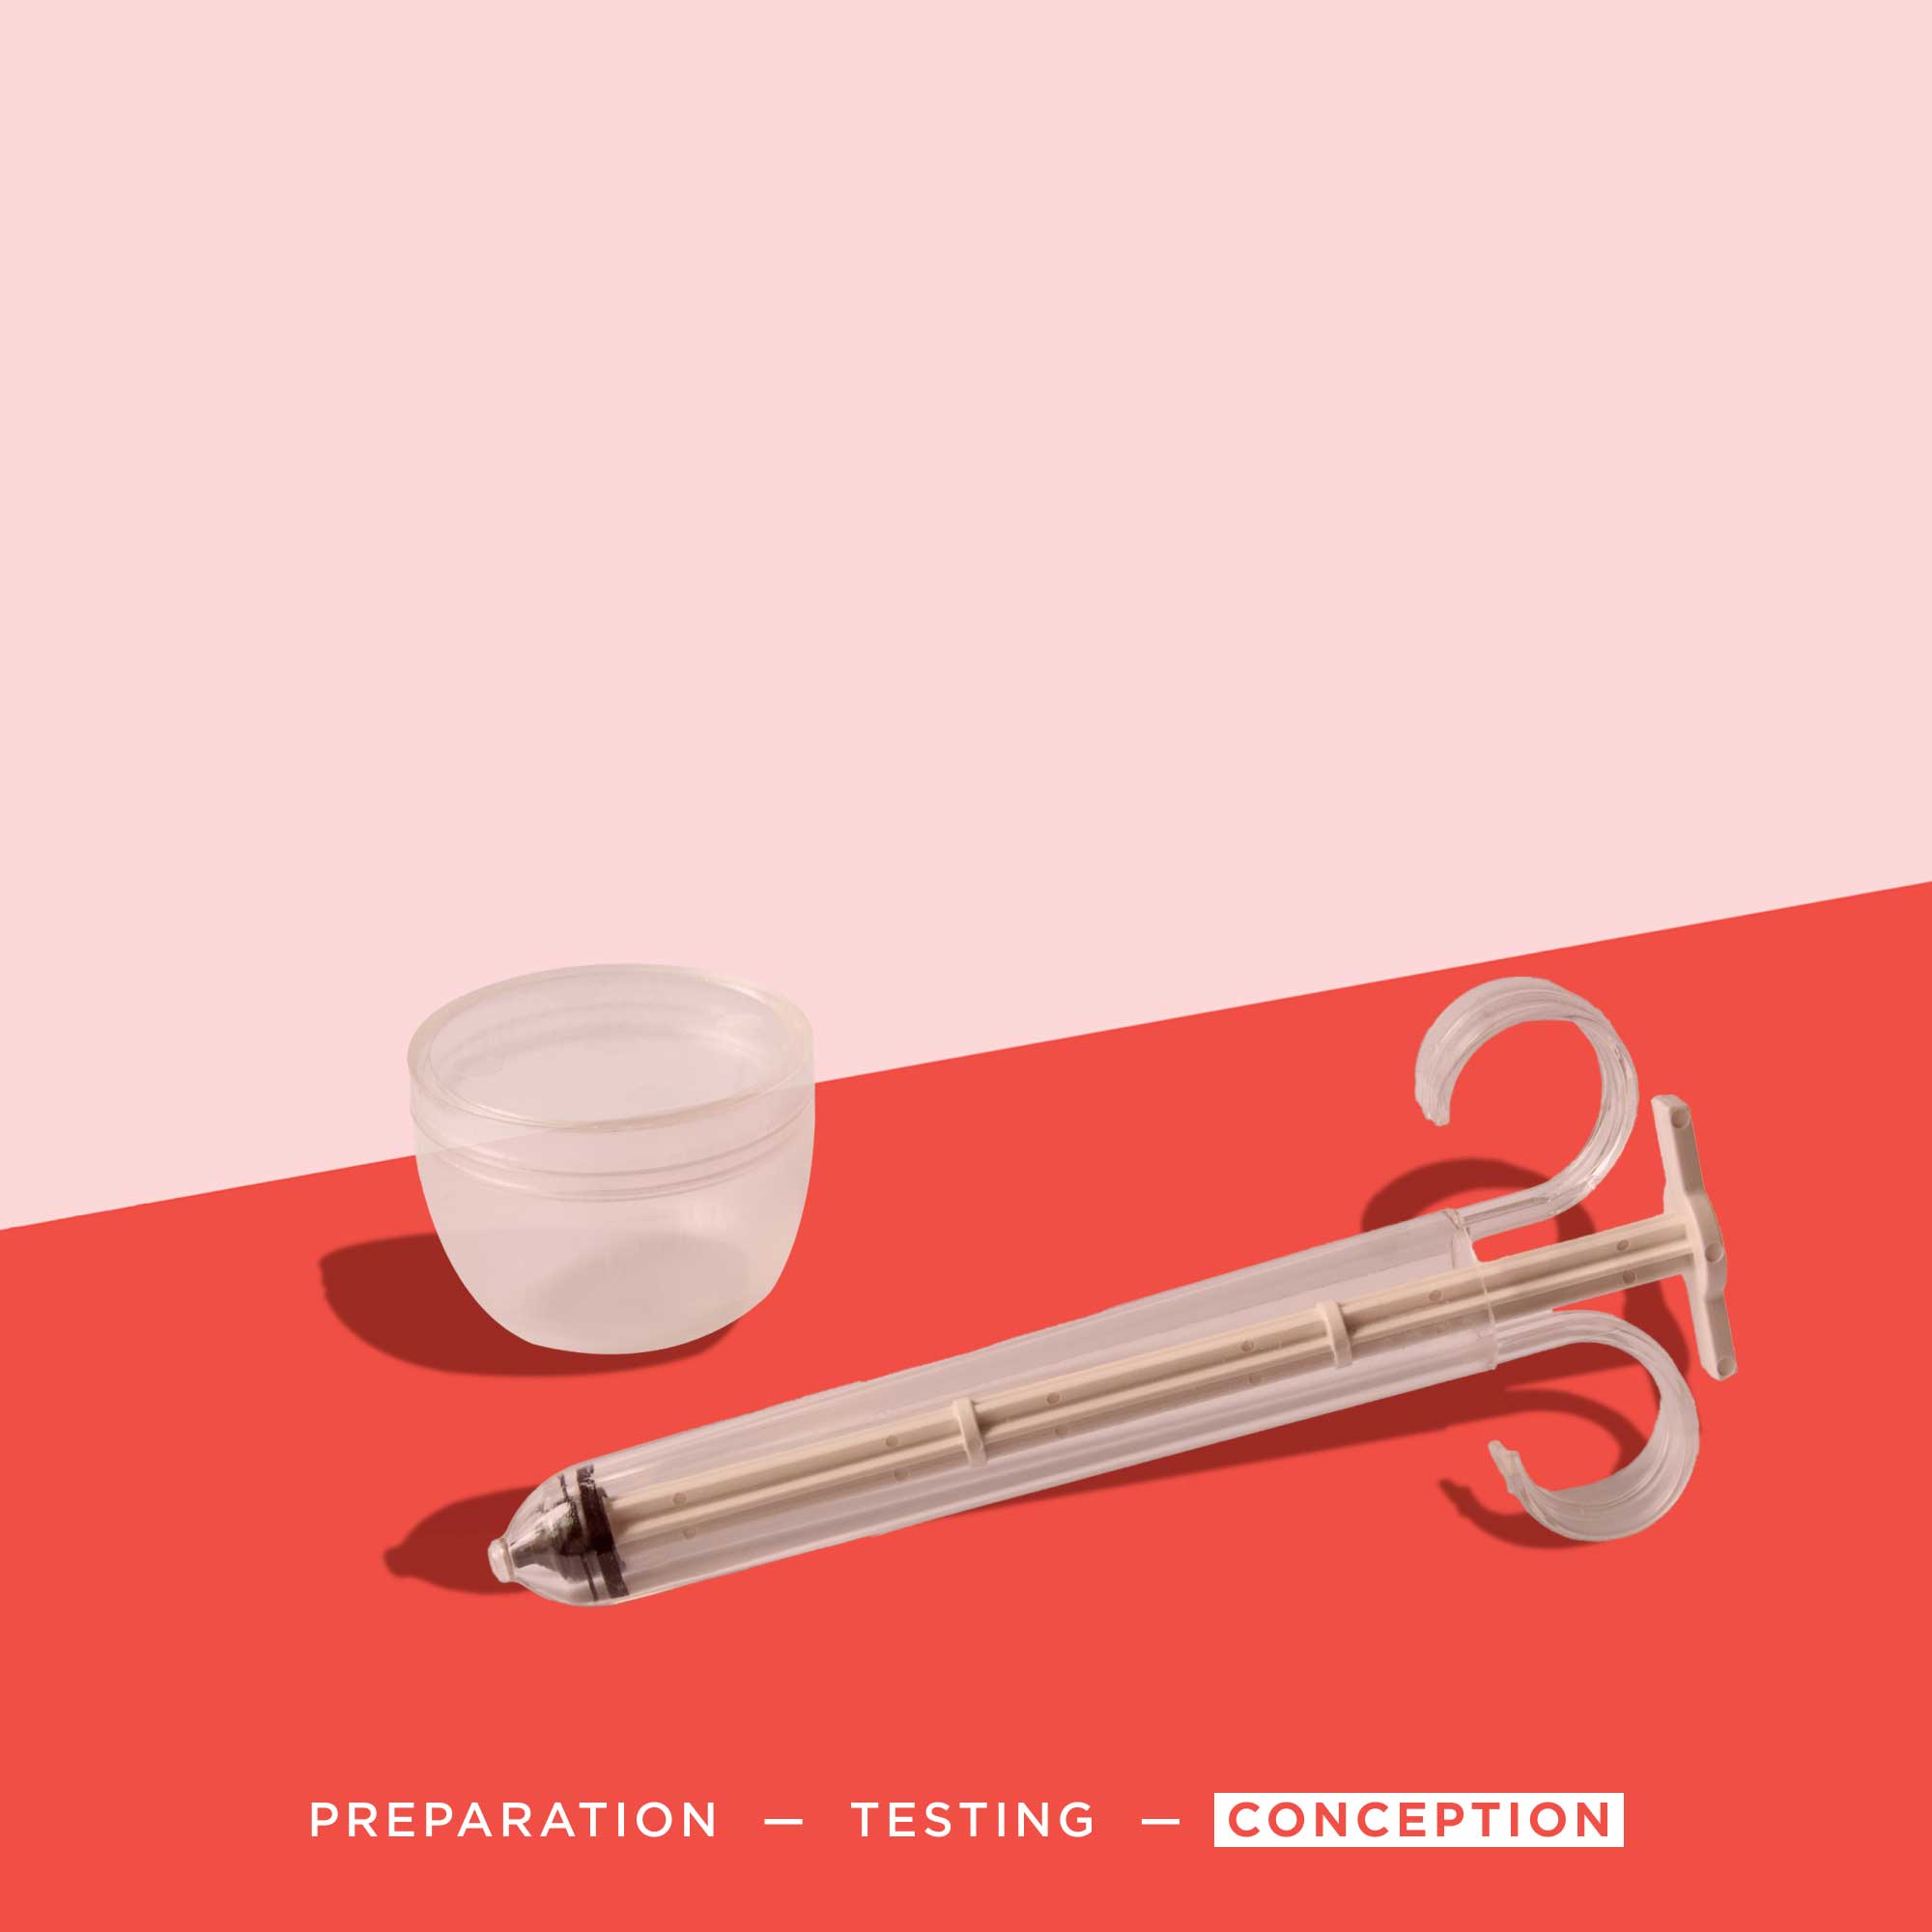 Pherdal collection cup and syringe on a red surface with a pink background